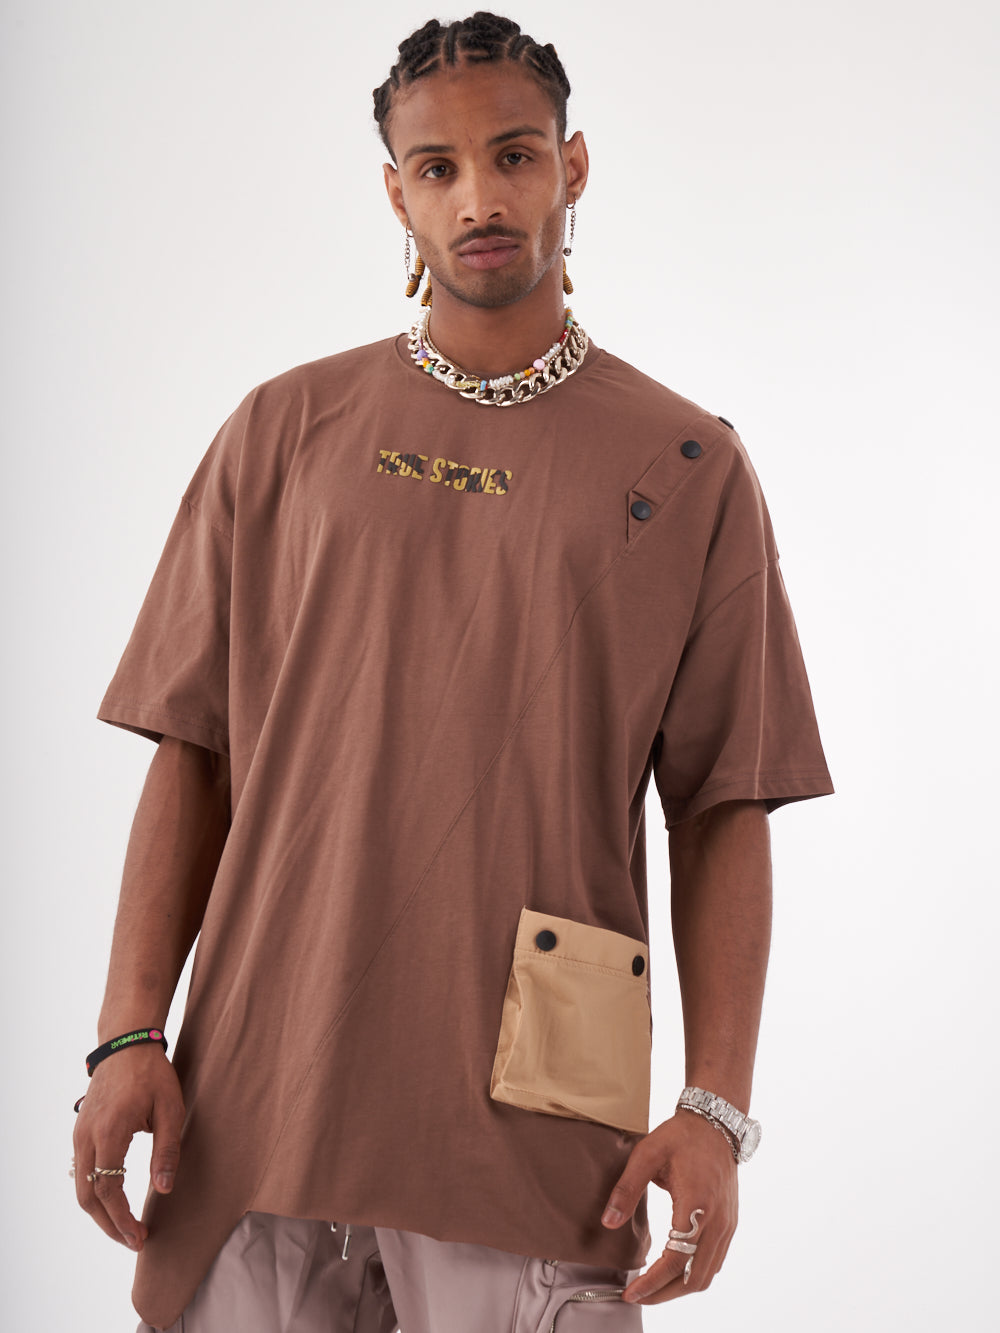 The man is wearing a brown BEATNIK T-SHIRT with a pocket.